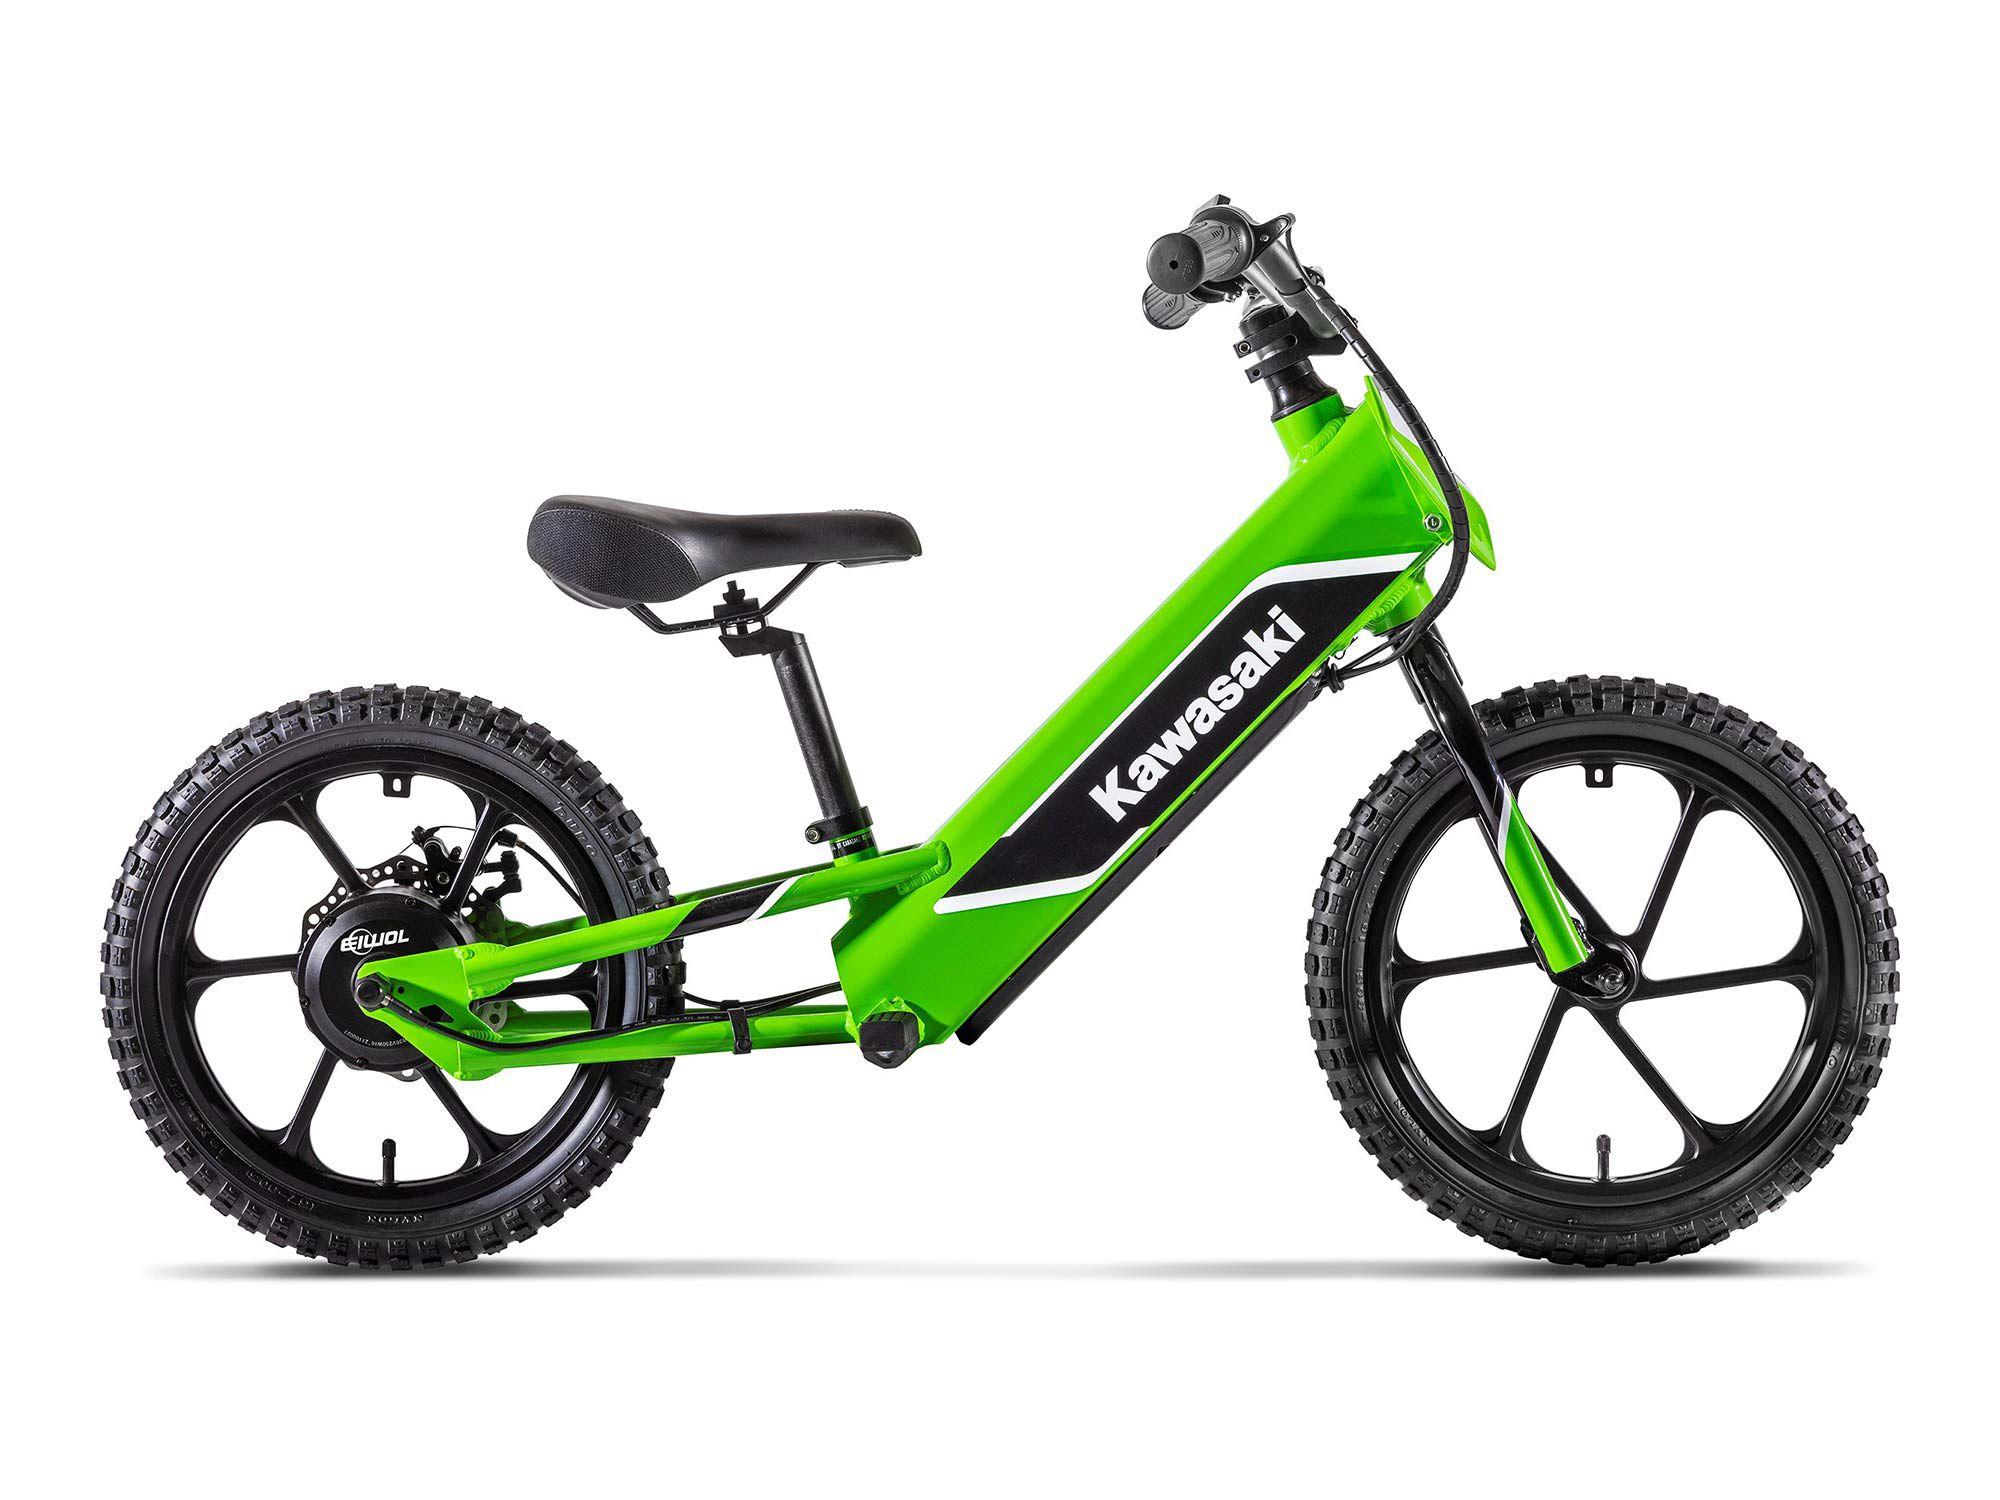 To accommodate the varying heights of the Elektrode’s target audience, the seat has more than 4 inches of adjustability. Its common seat post size of 27.2 millimeters makes it easily swappable with taller seats.